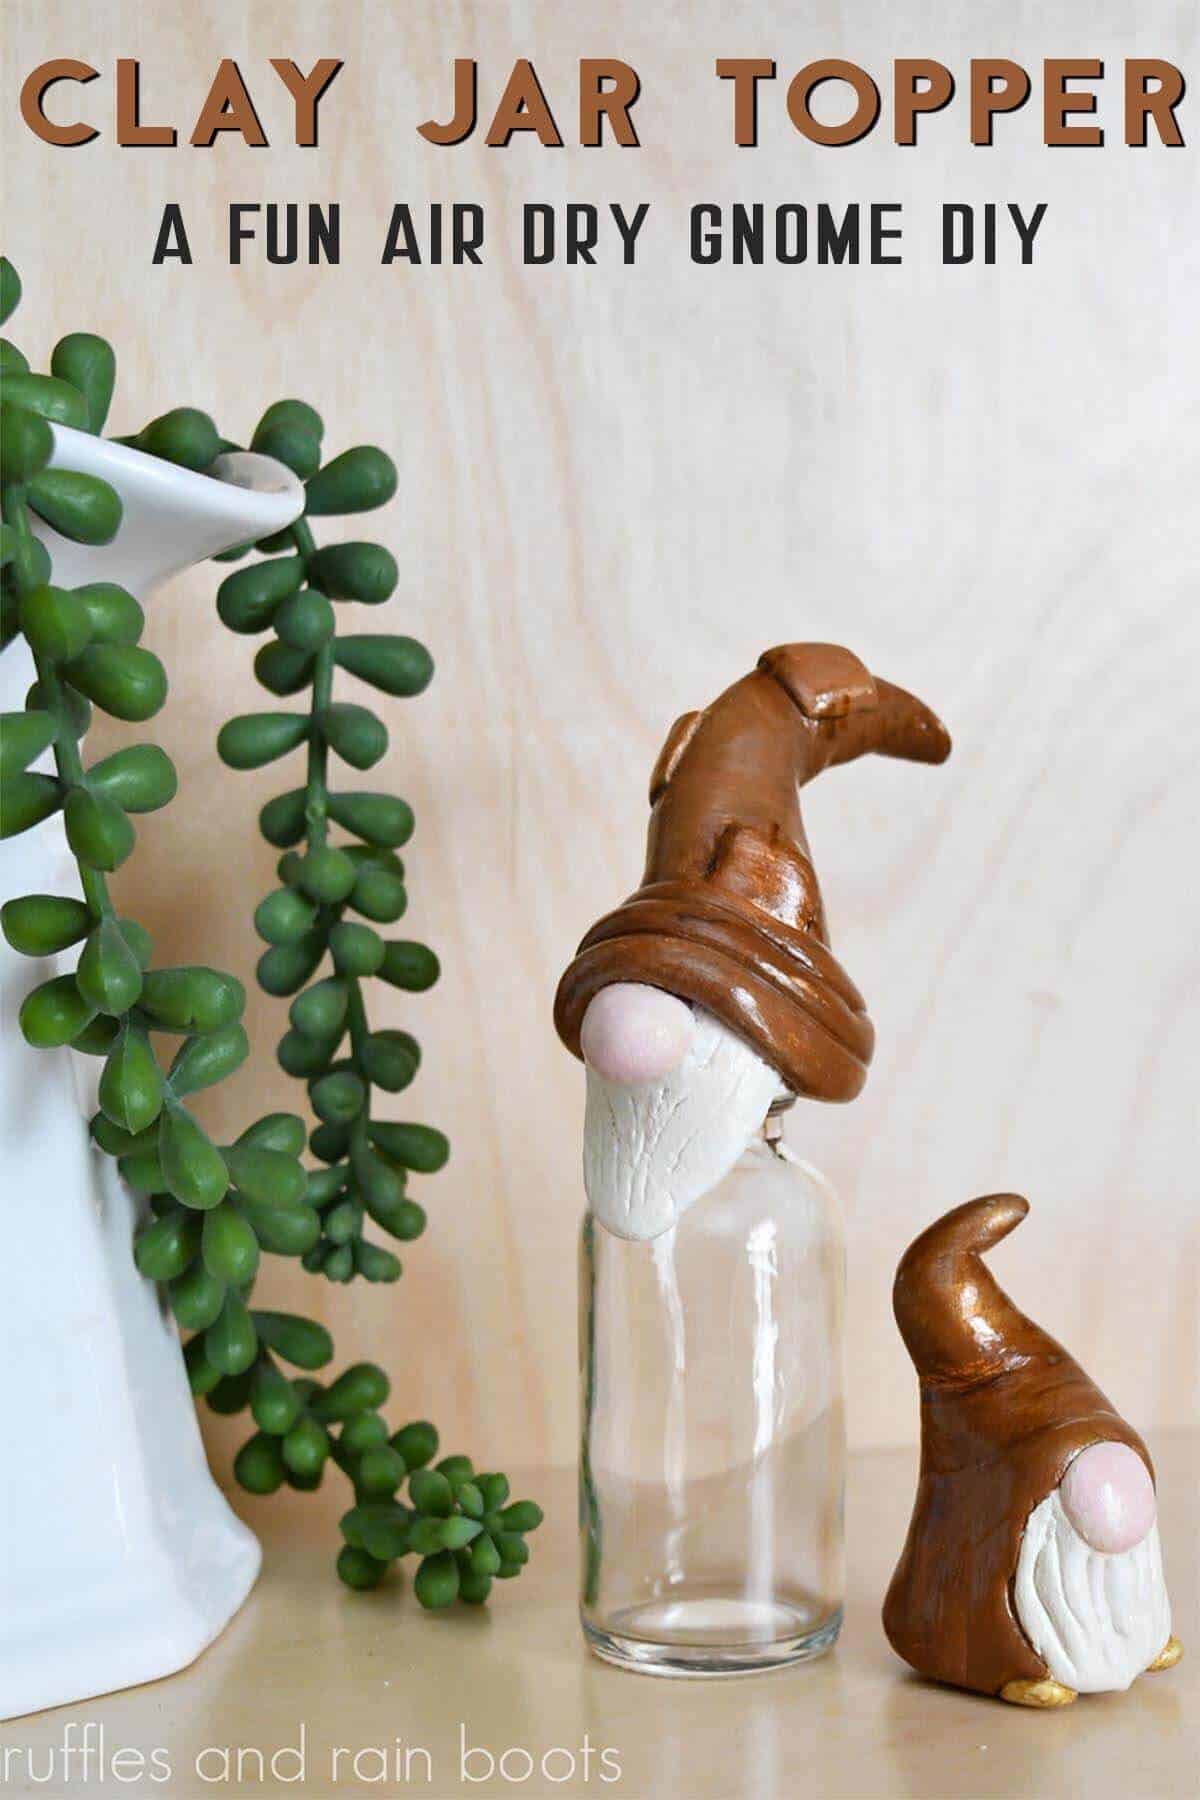 Vertical image of a gnome bottle topper with text which reads clay jar topper a fun air dry gnome DIY.